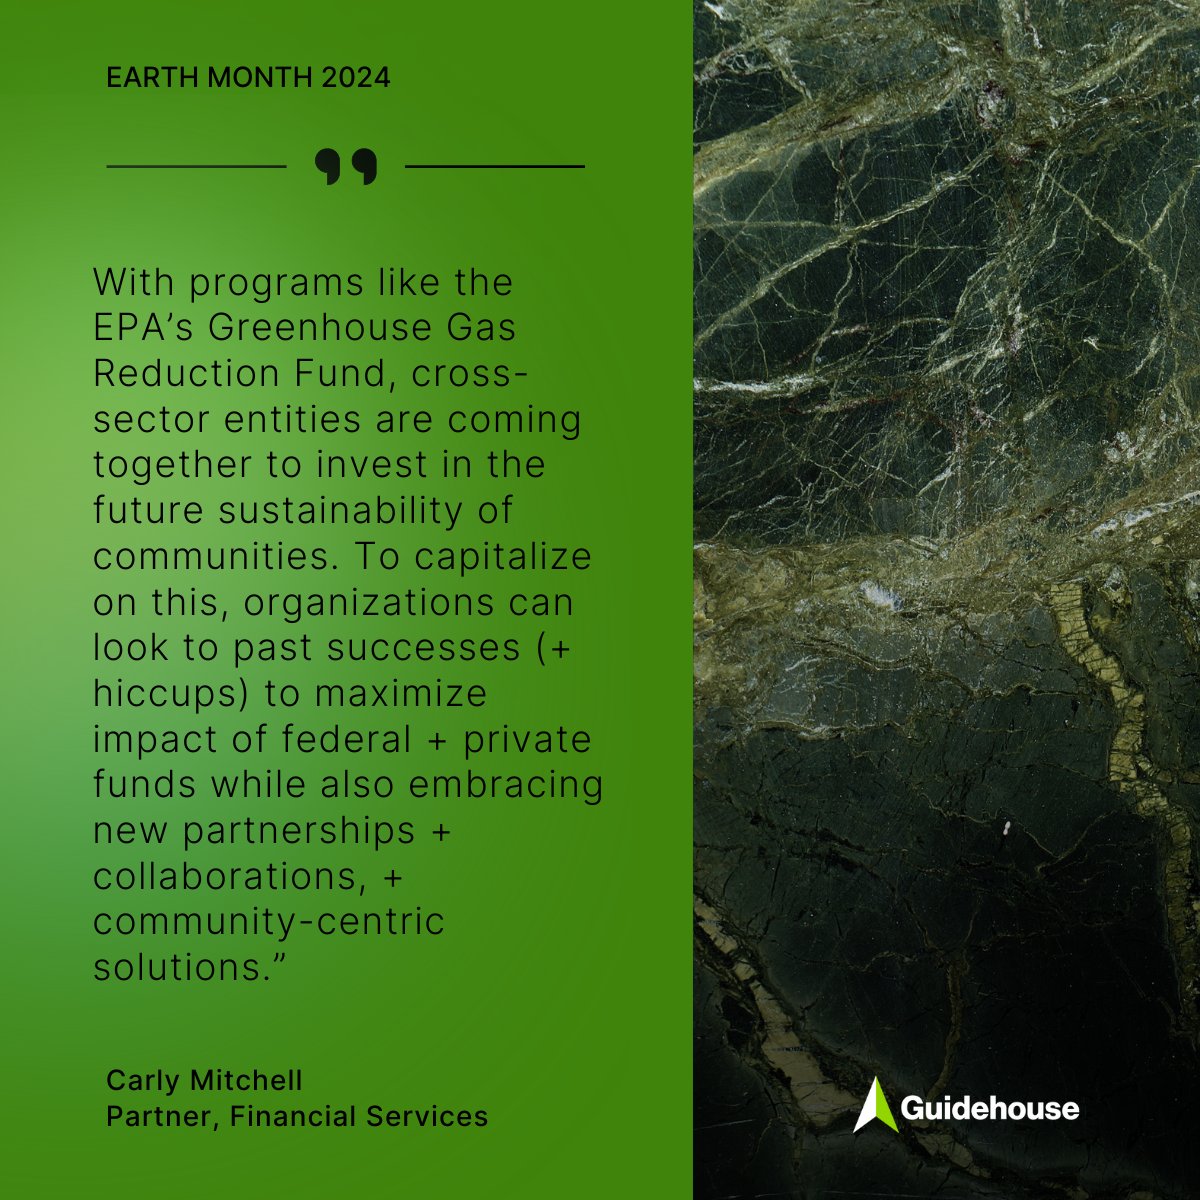 The US @EPA has announced the Greenhouse Gas Reduction Fund (GGRF) awards. As applicants plan for their first year, #GuidehouseExperts share lessons learned: guidehou.se/3wVBFEJ #EarthMonth #EarthDay